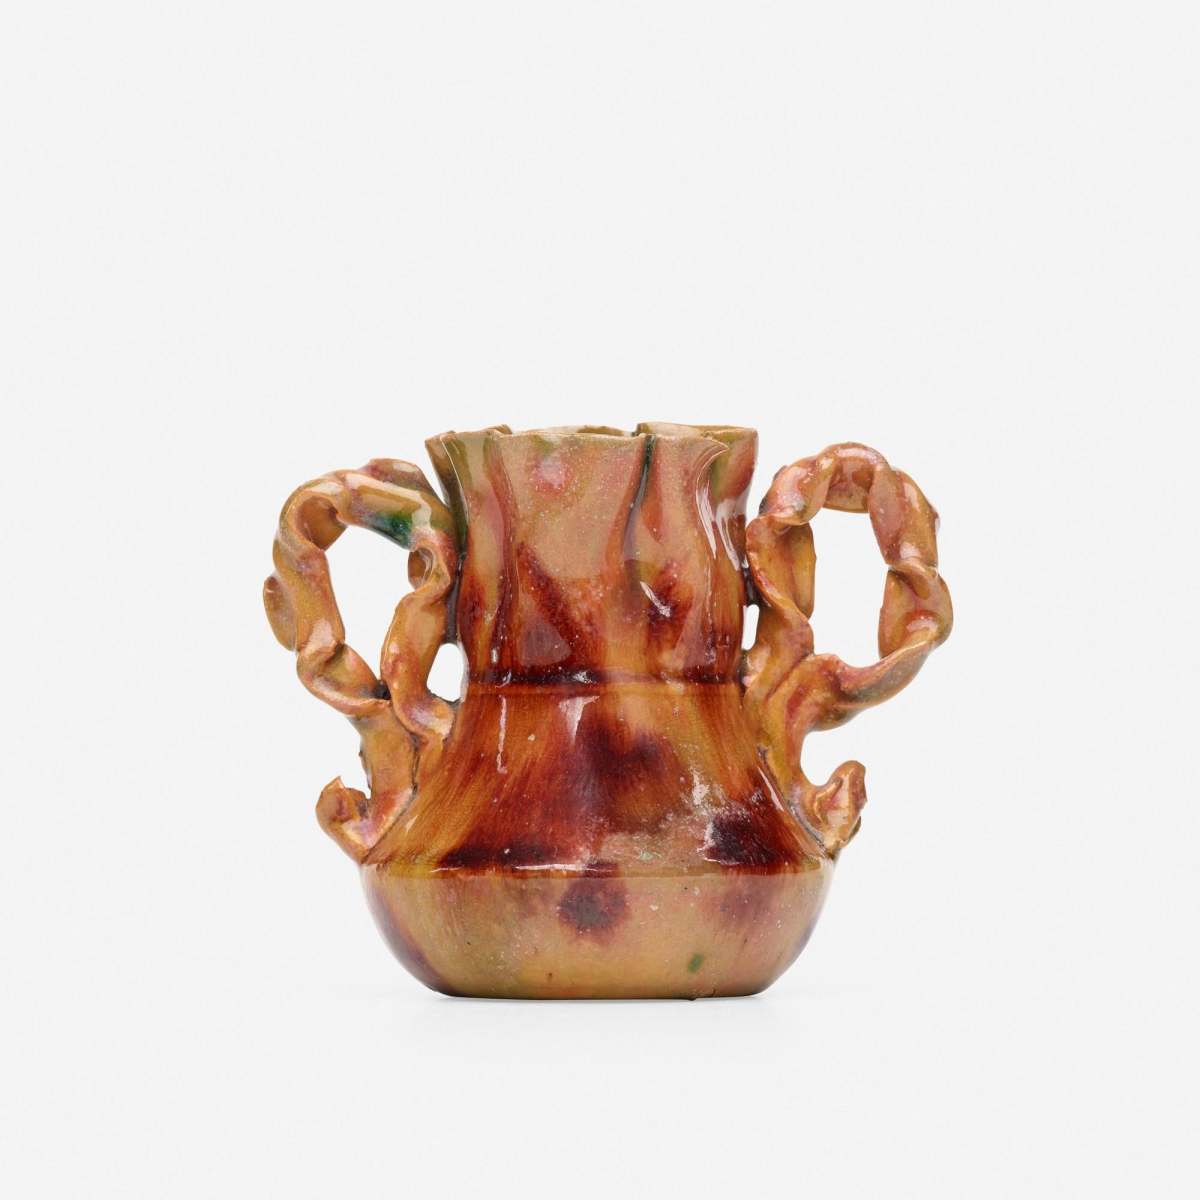 Rare miniature vase, 1895-96, with crimped ear handles and a raspberry, ochre, andgreen glaze, 3” h × 3-1/2” w × 2-1/2” d; sold for $8,500 at Rago.